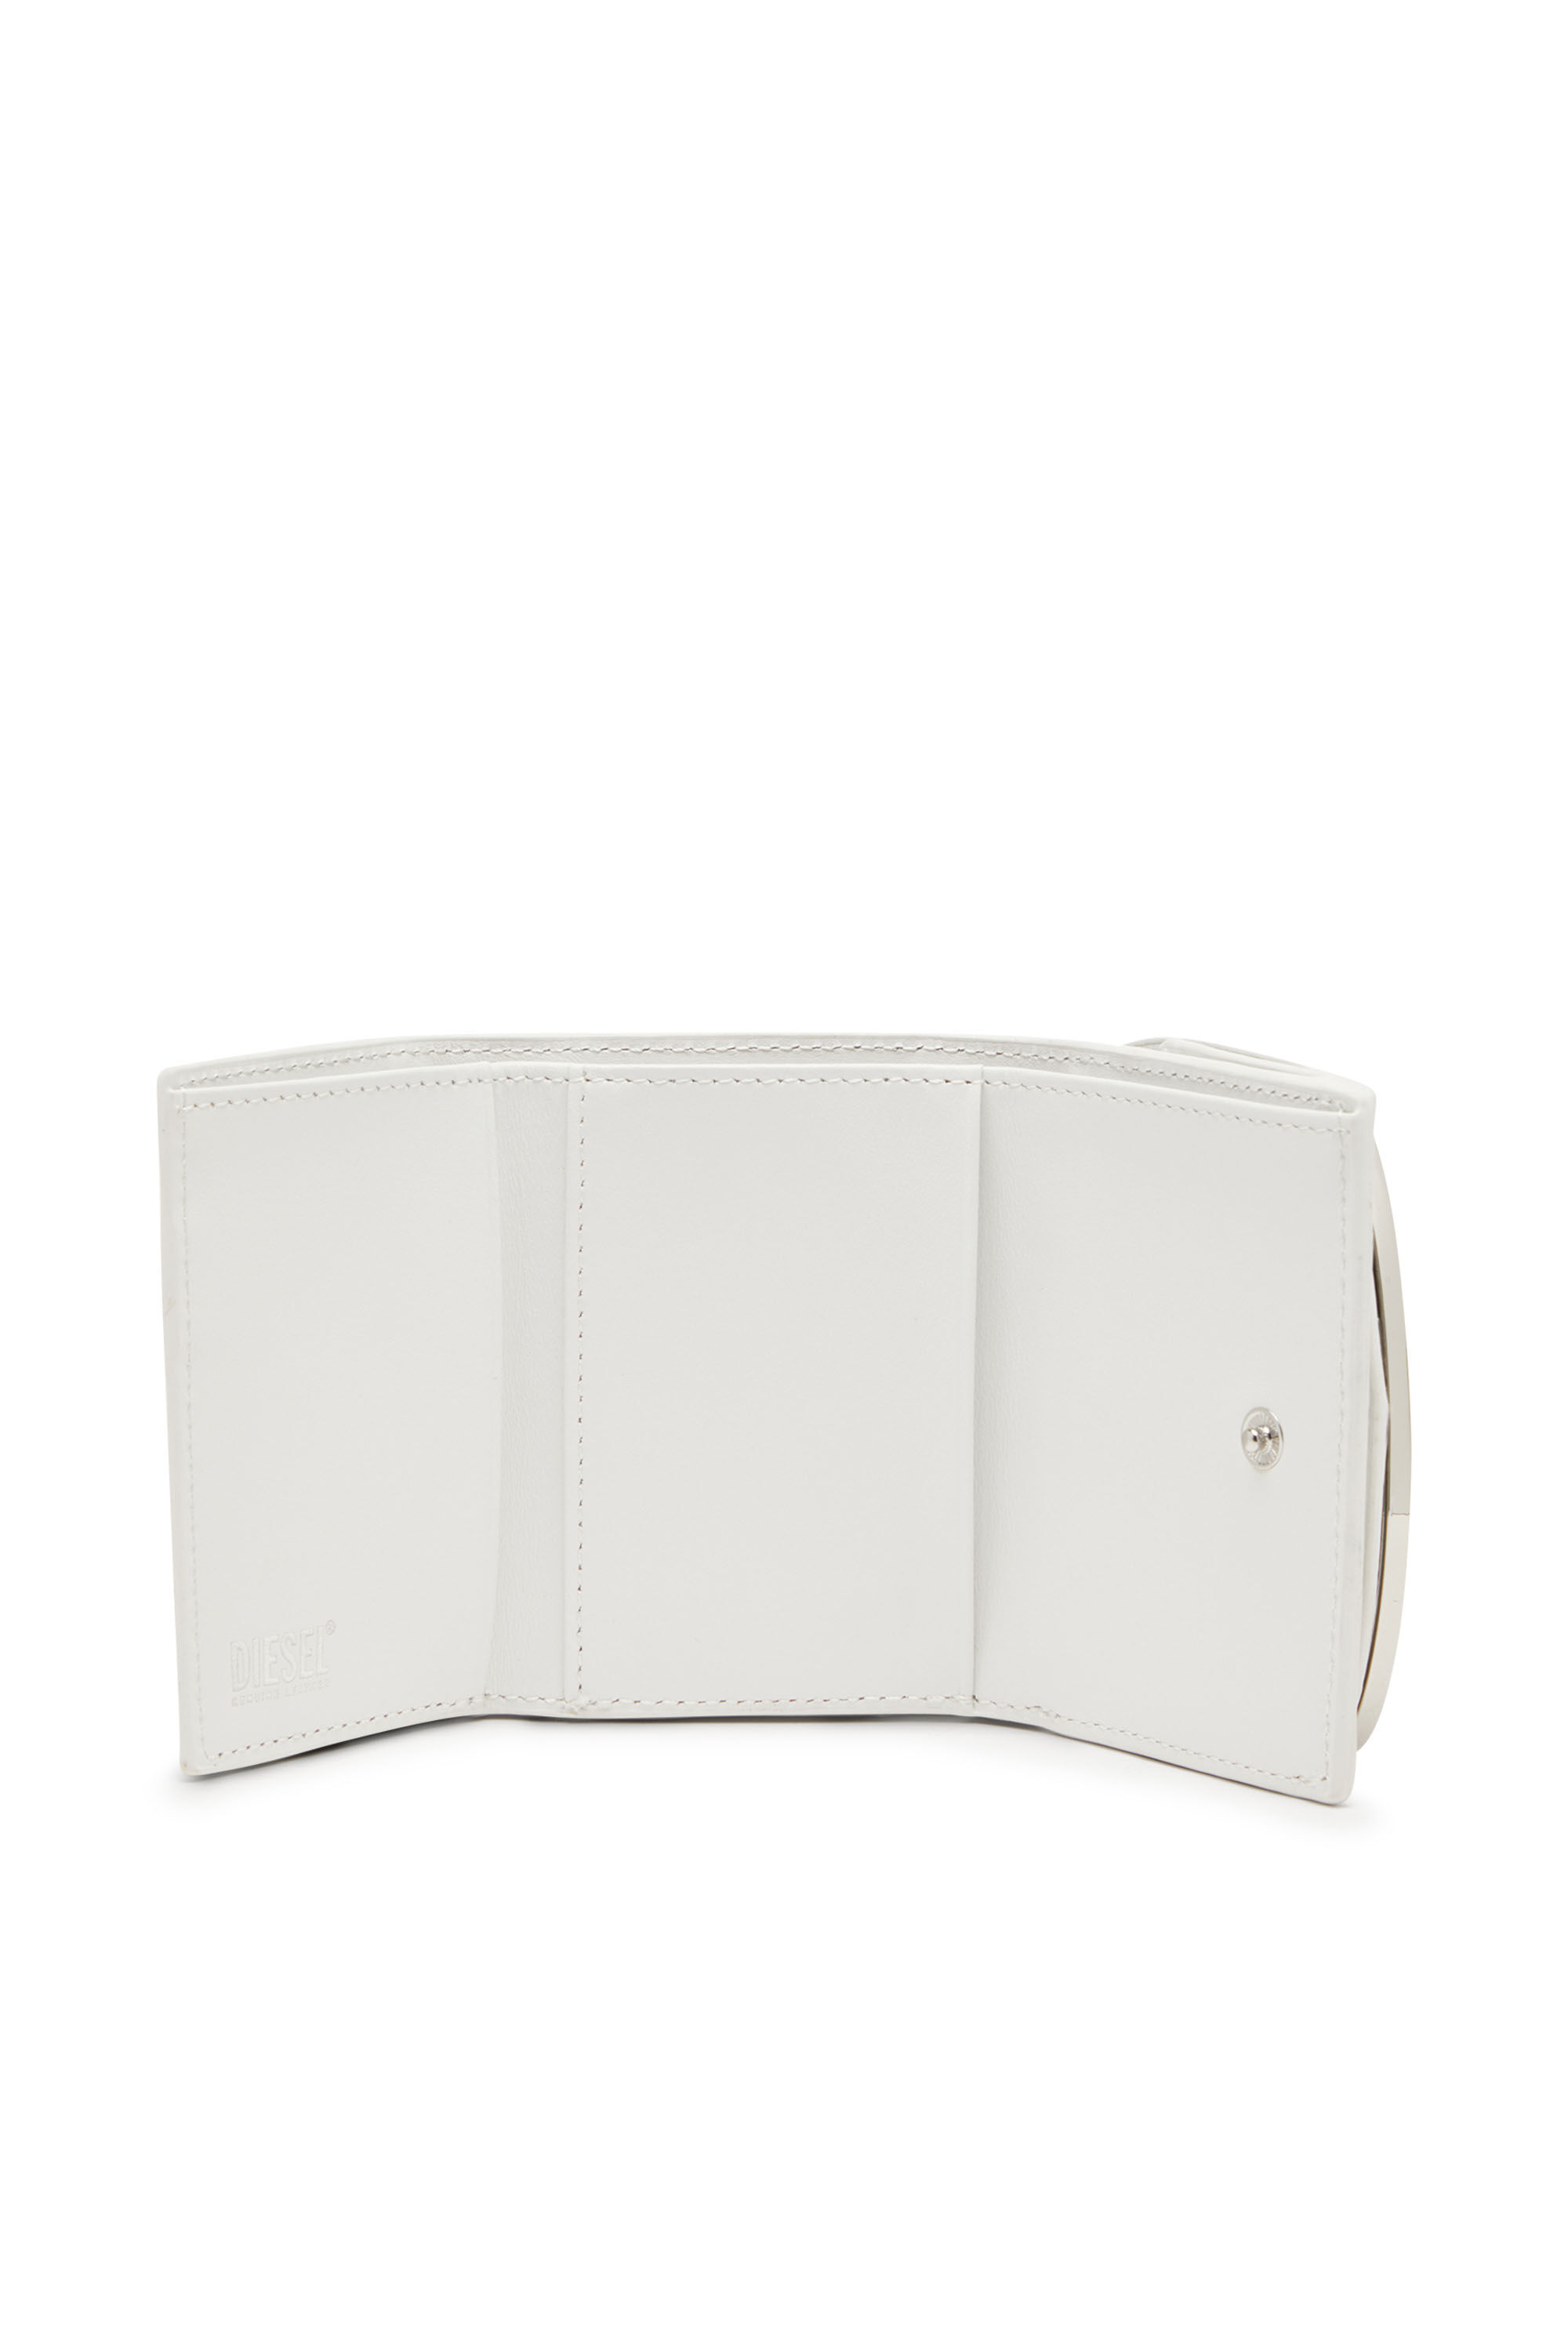 Diesel - 1DR TRI FOLD COIN XS II, Female Tri-fold wallet in leather in ホワイト - Image 3